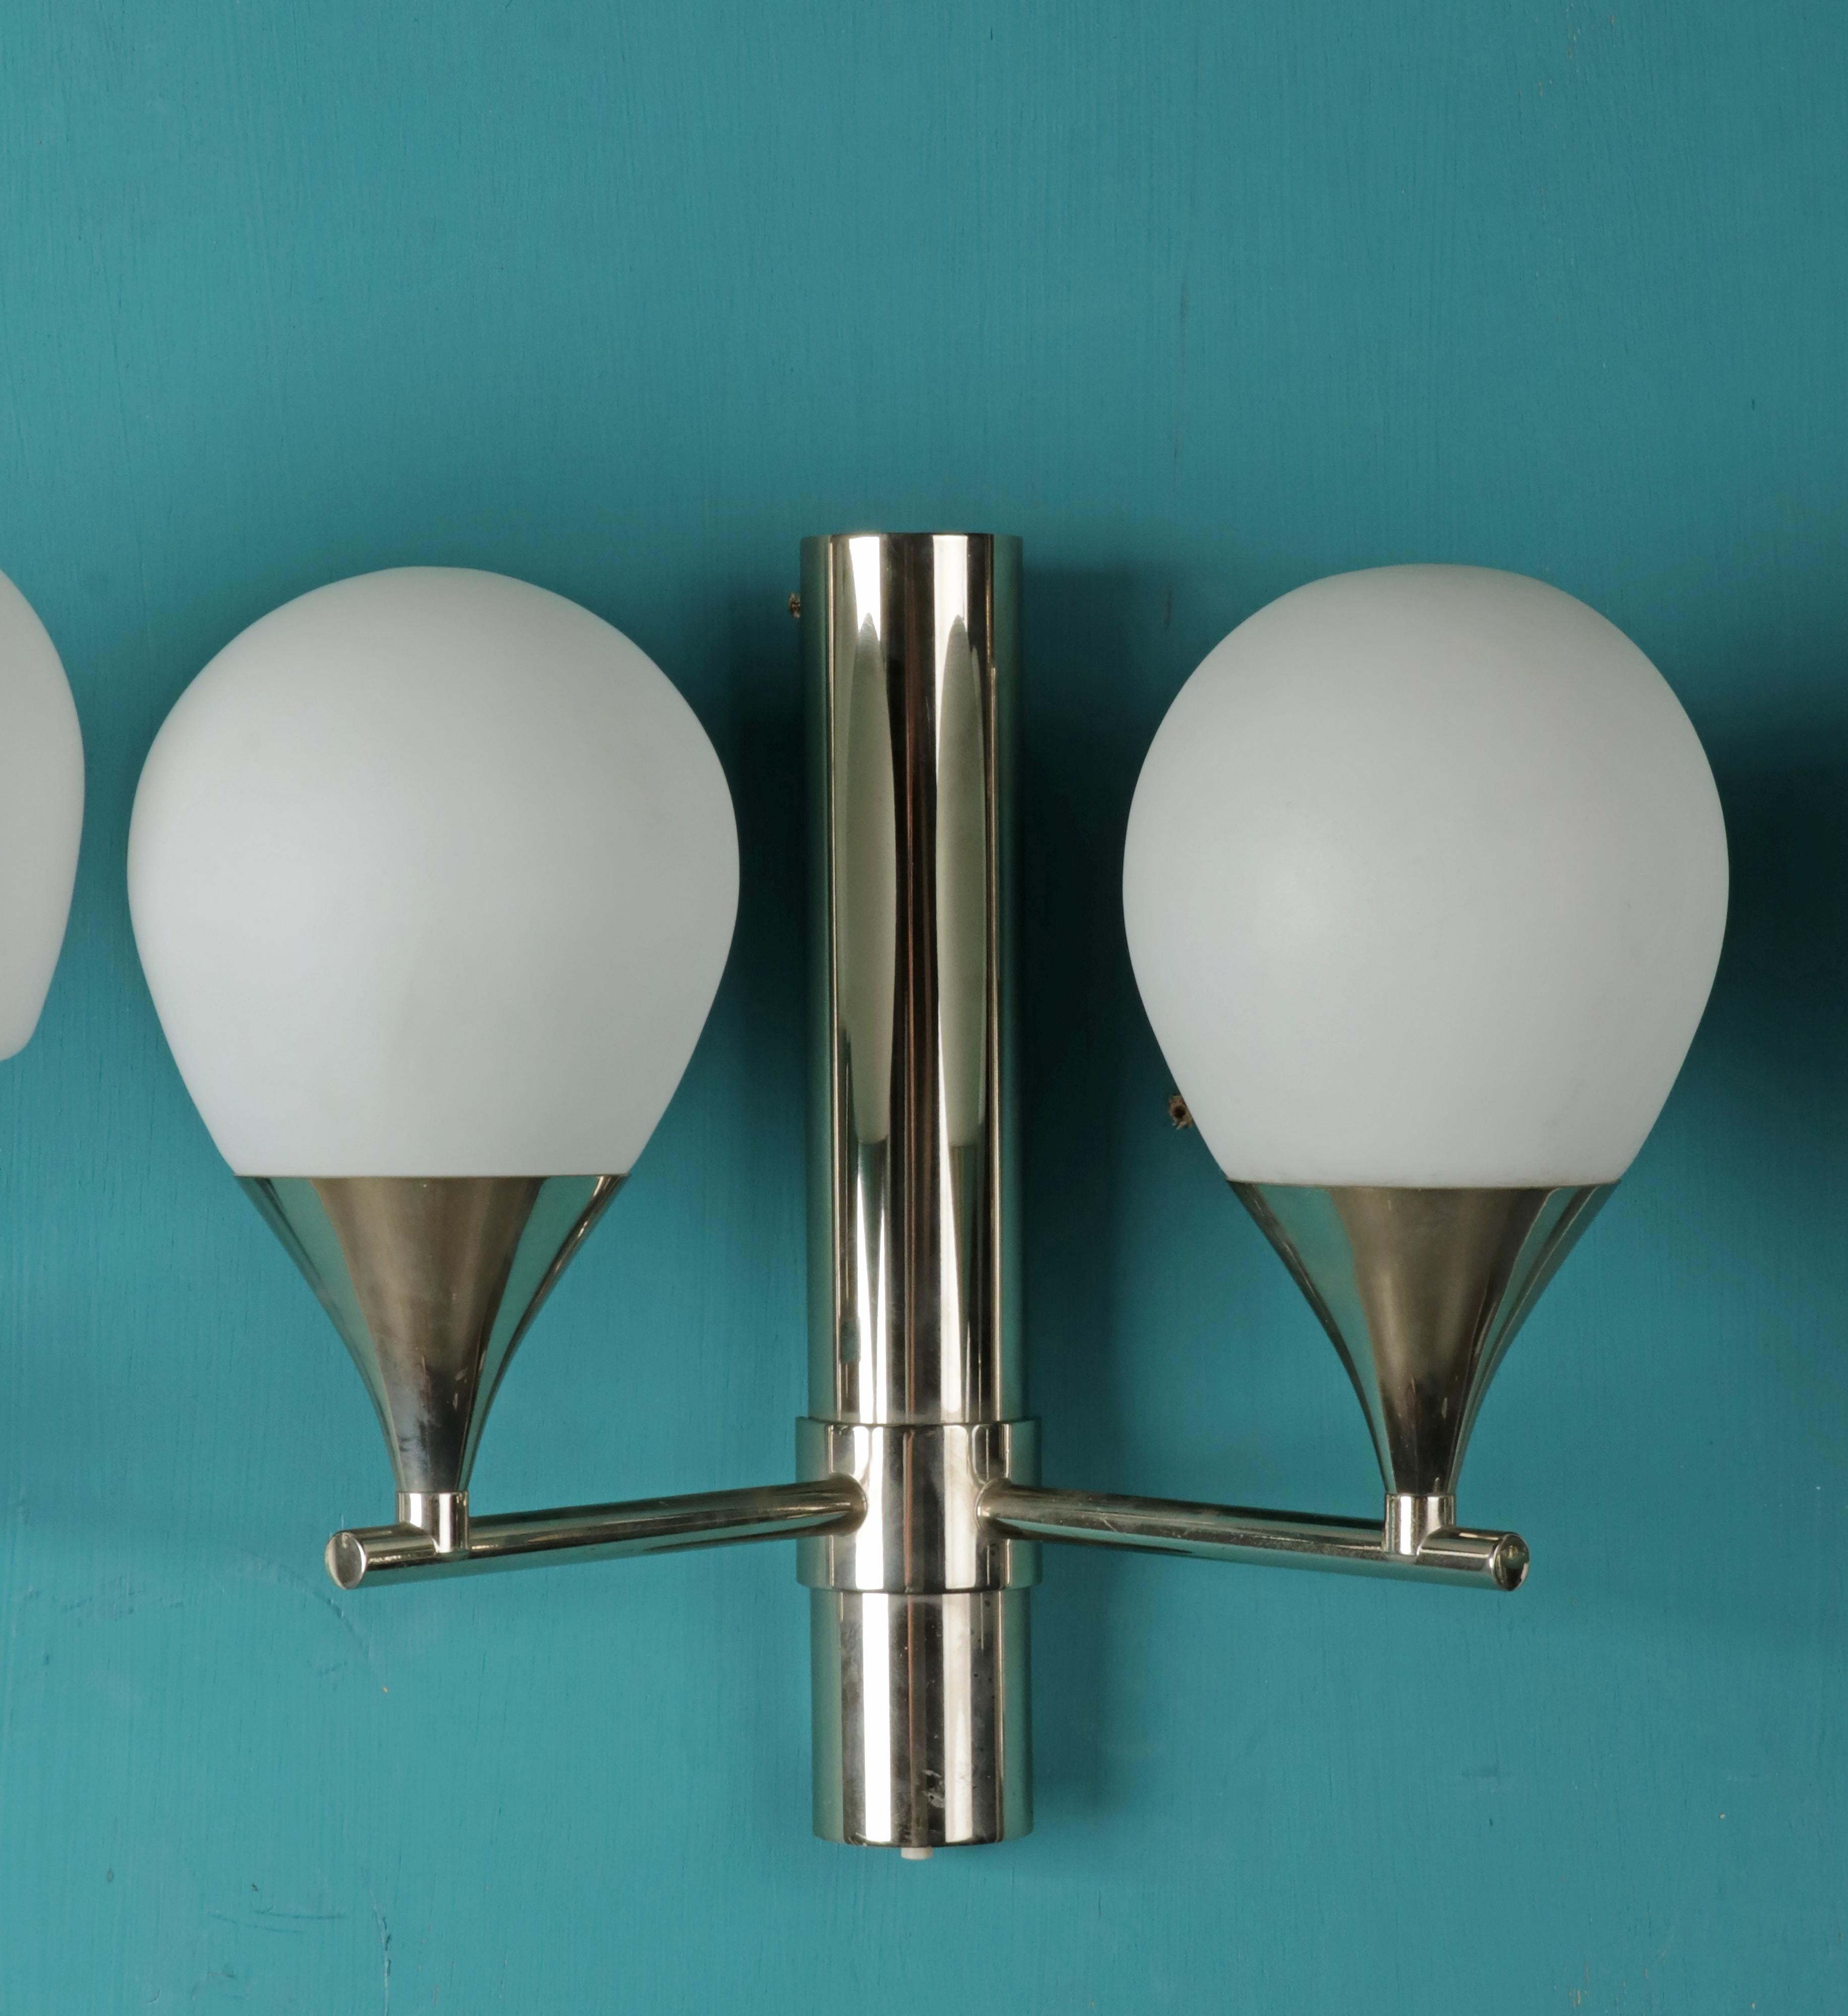 Set of Four Mid-Century Modern Chrome Plated Sconces / Wall Lights For Sale 5